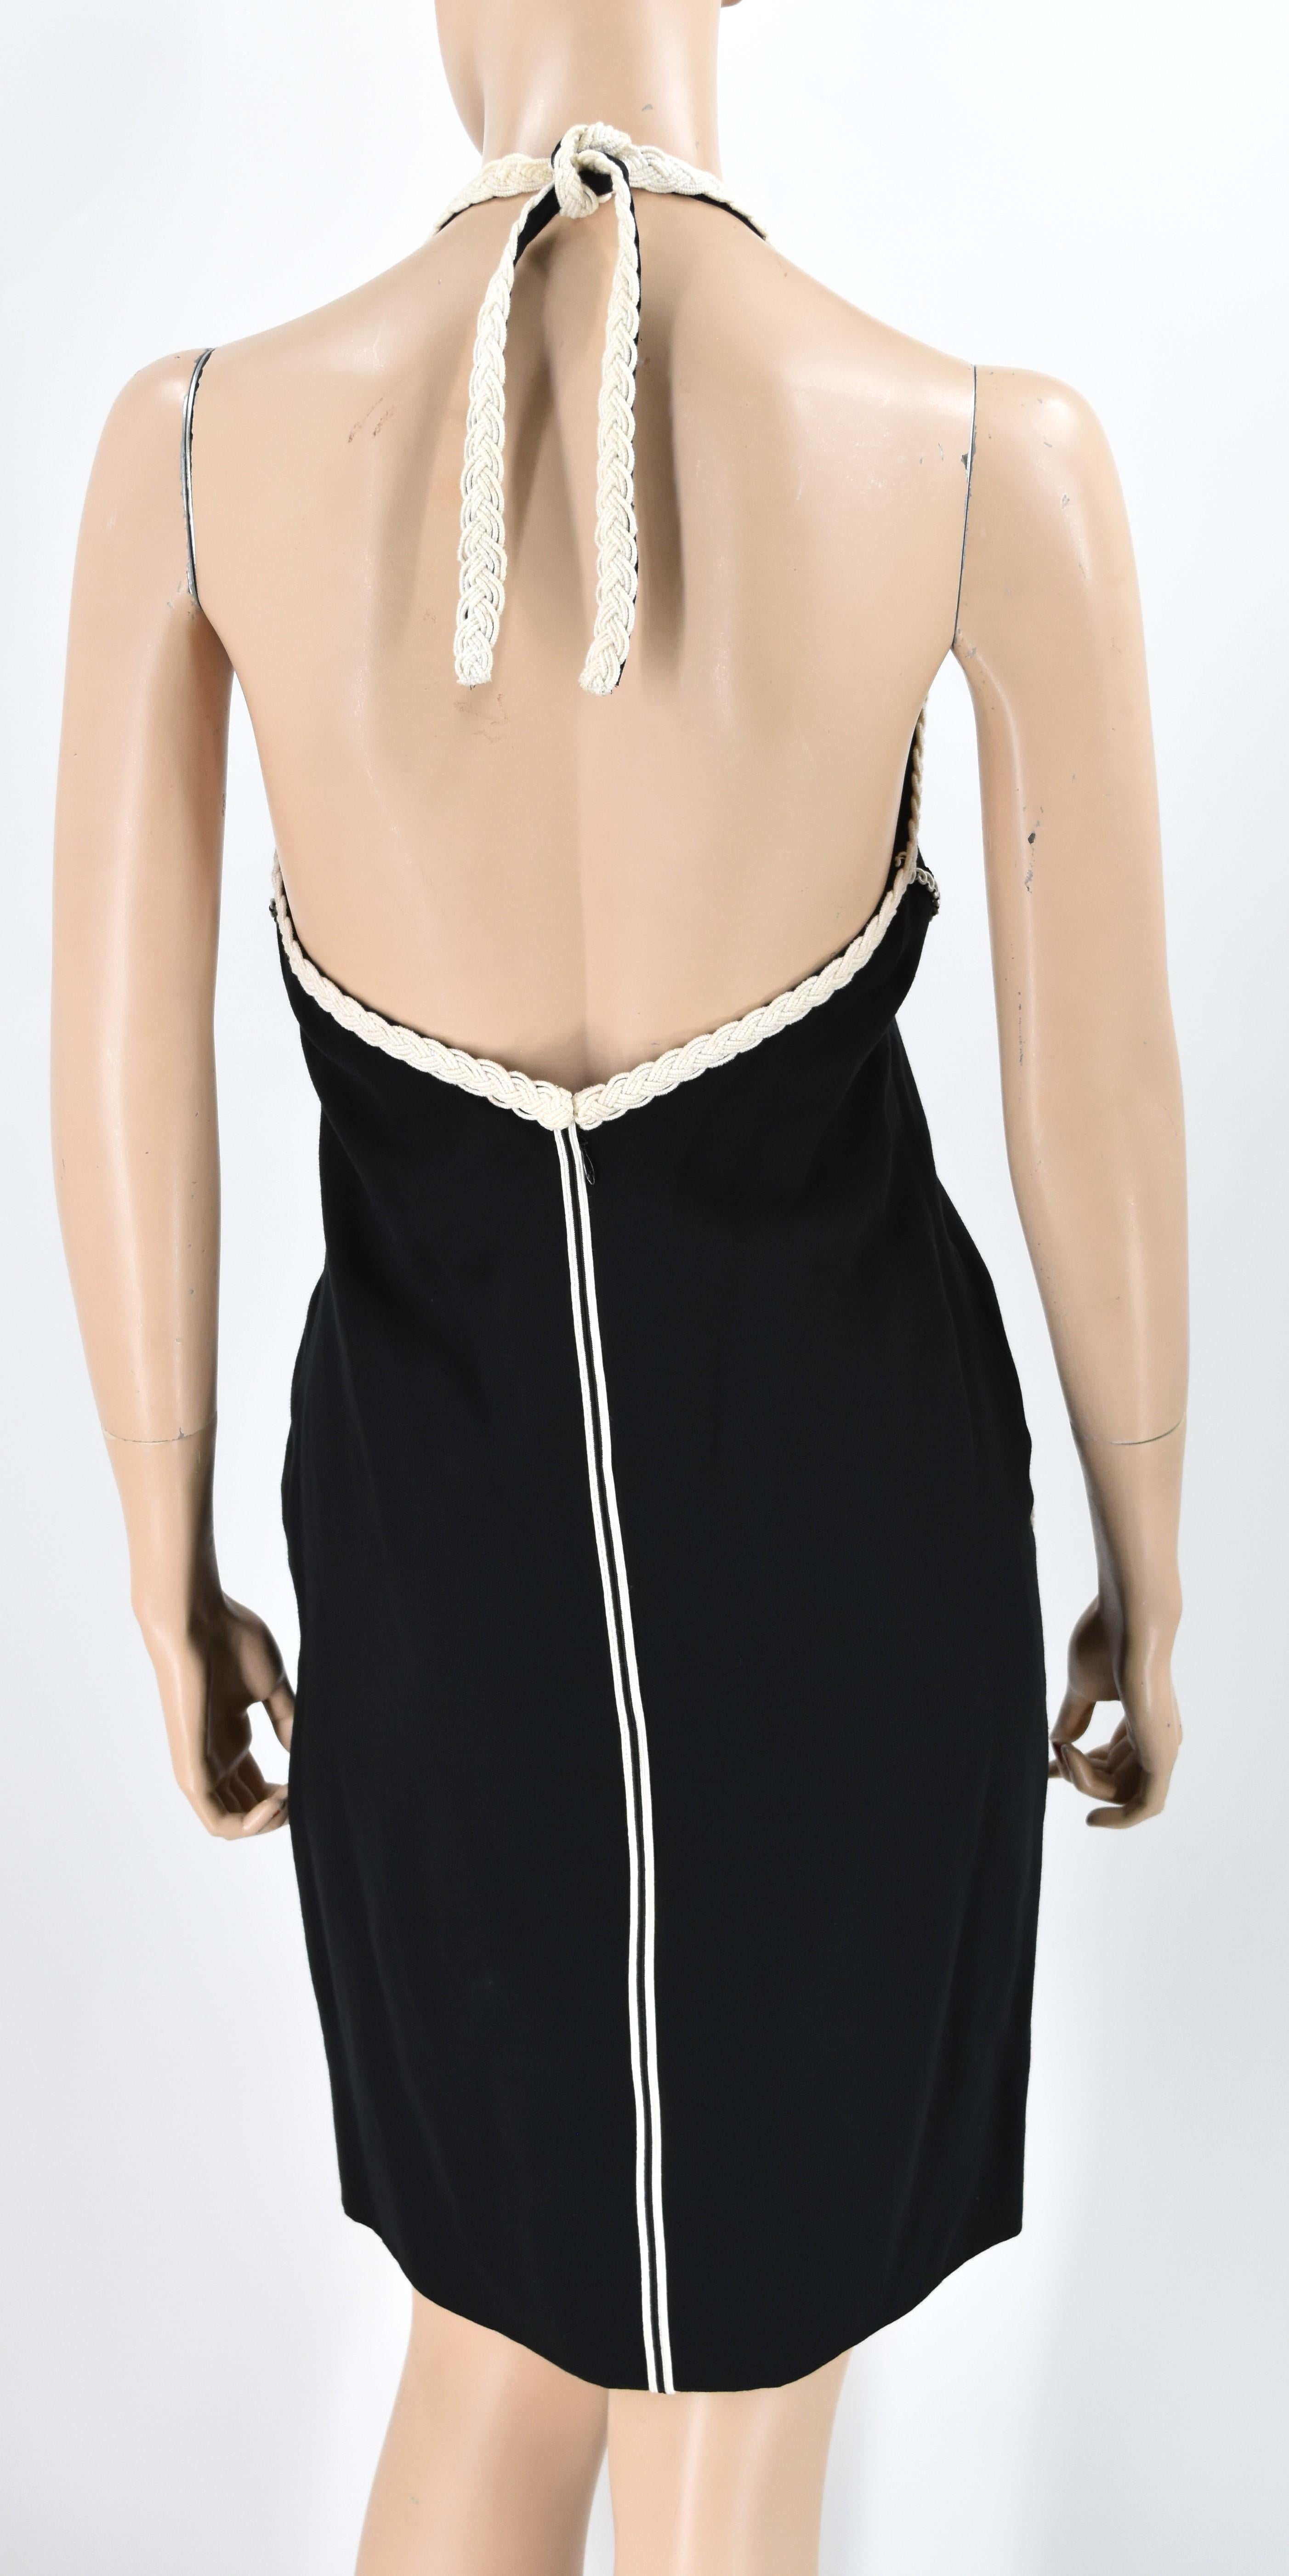 Chanel Boutique Braided Trim Runway Halter Dress 38  In Excellent Condition For Sale In Merced, CA